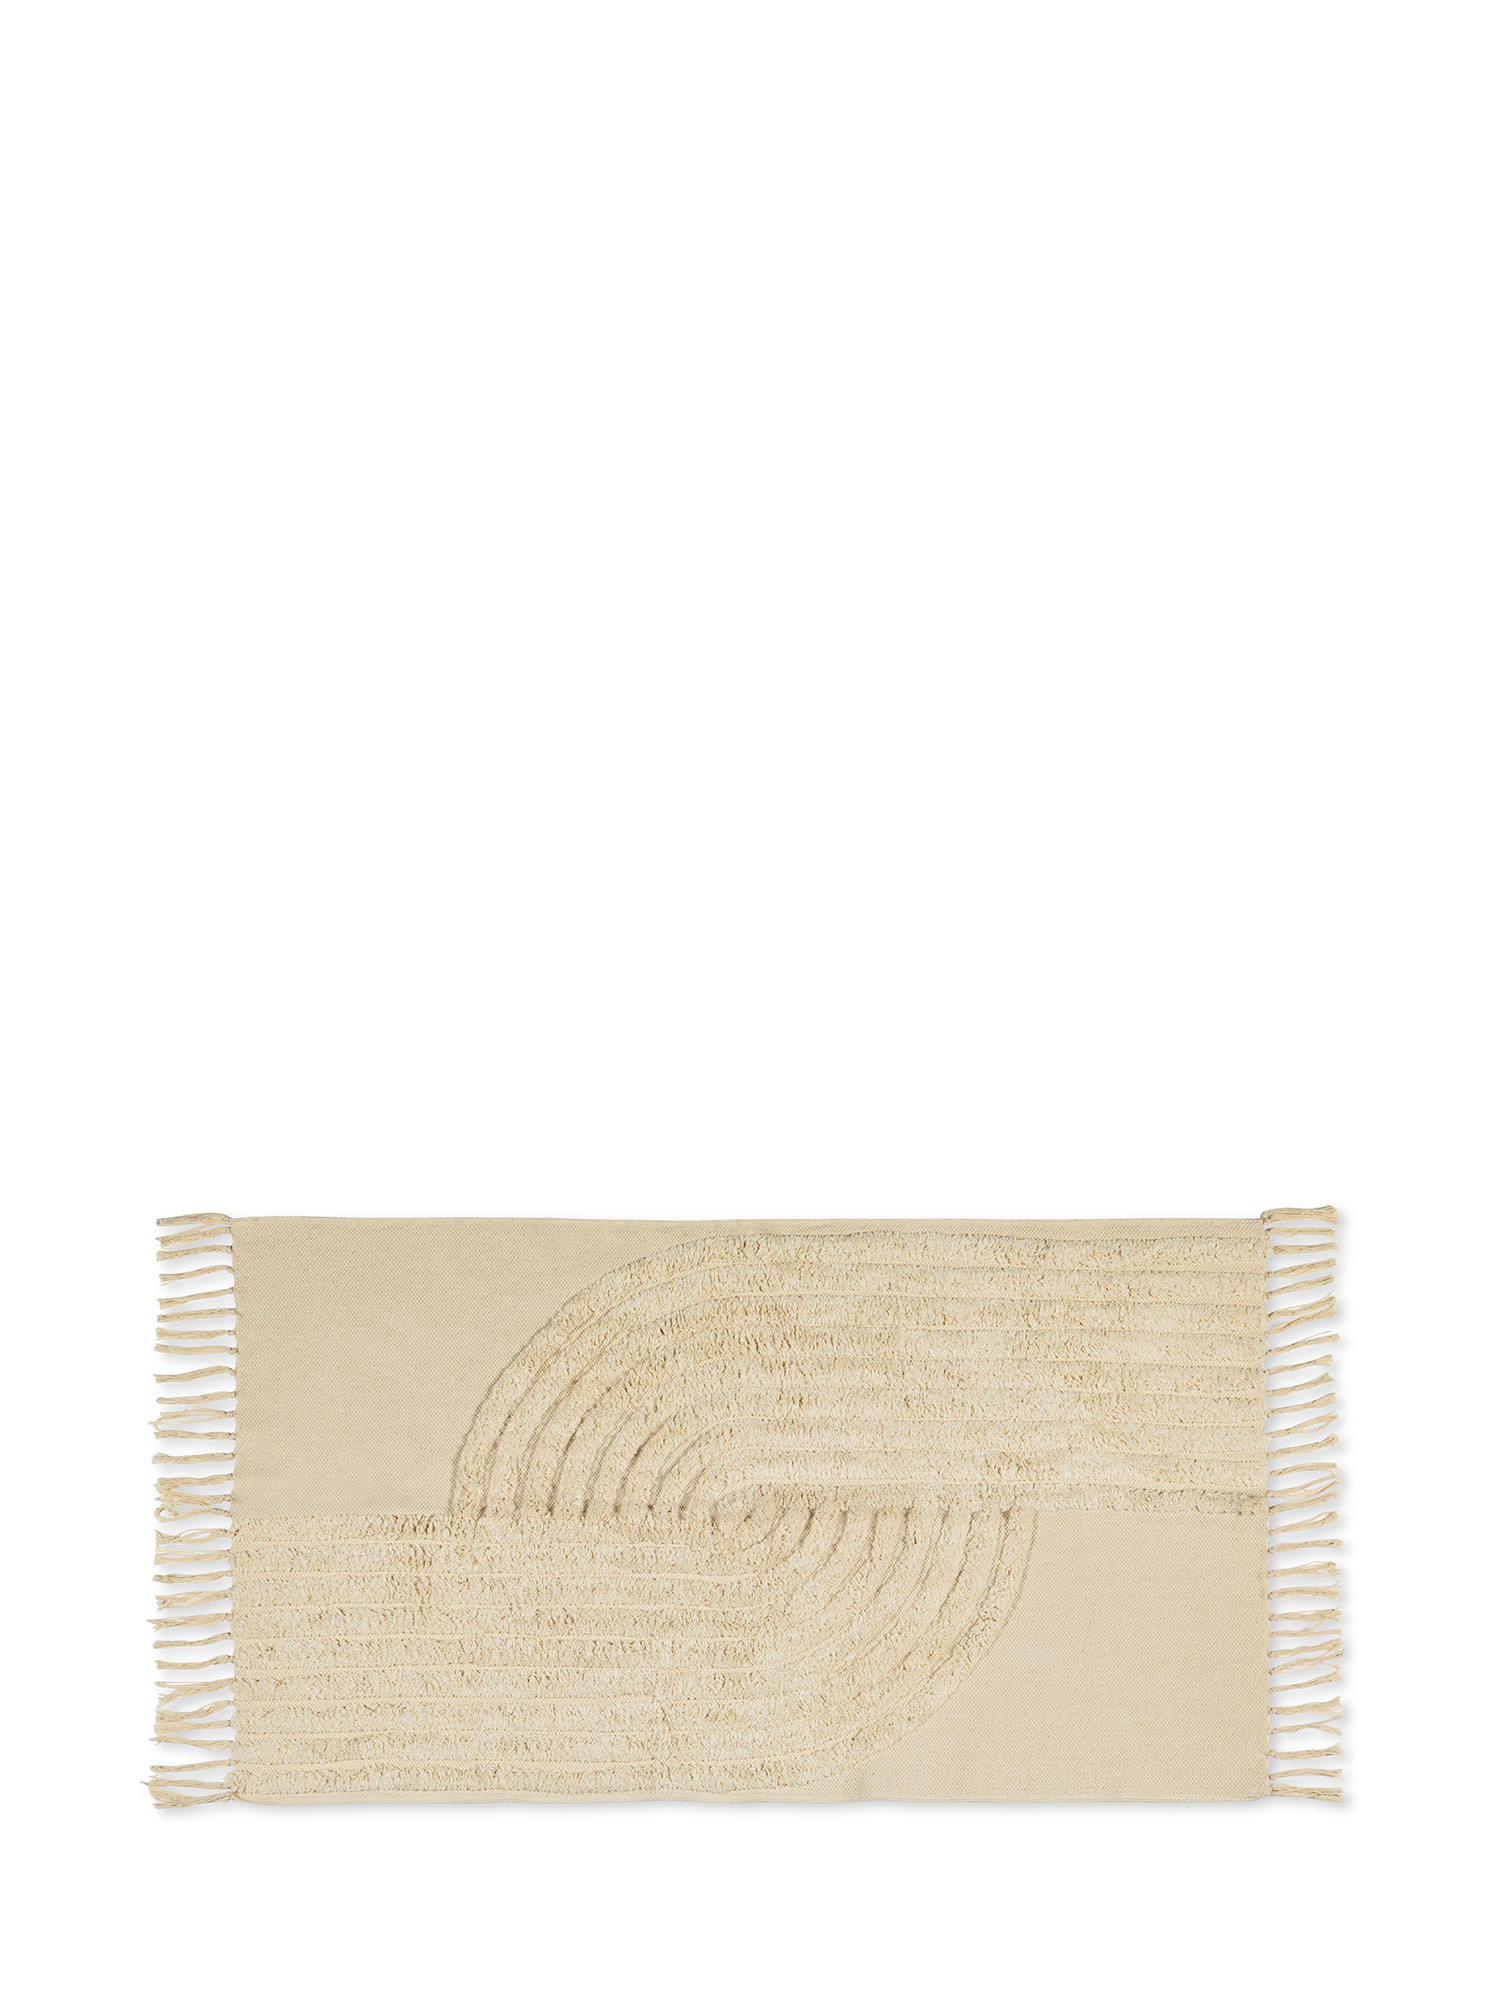 Jacquard cotton rug with fringes and relief pattern, Sand, large image number 0